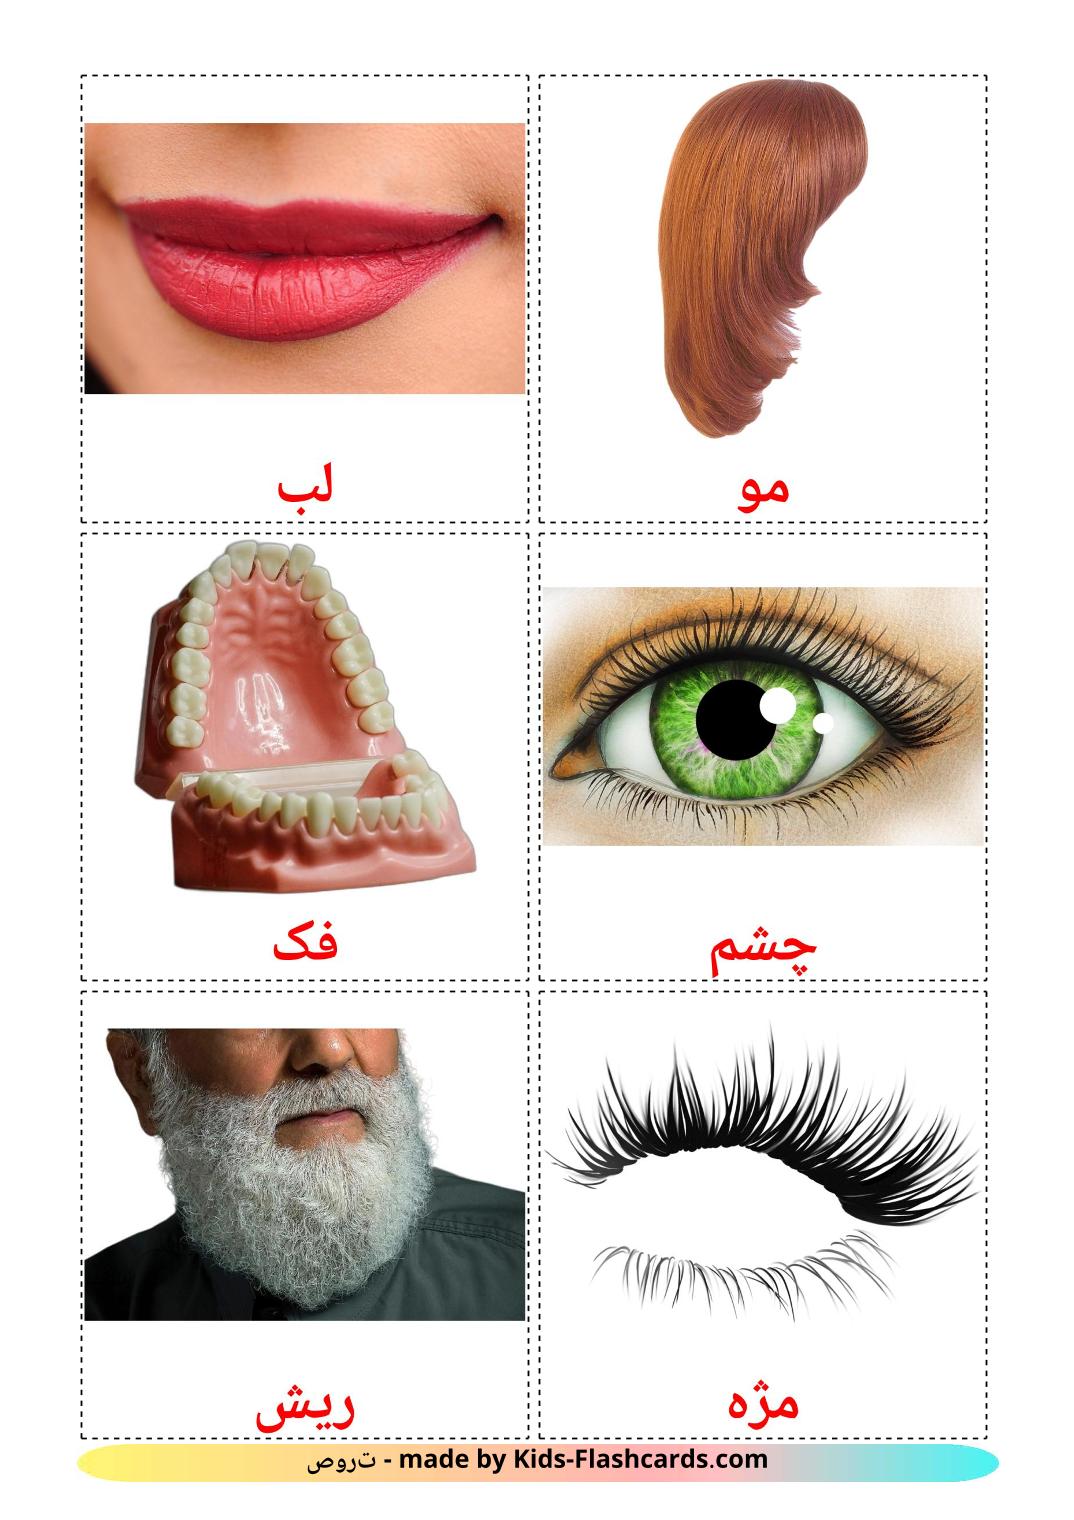 Face - 20 Free Printable persian Flashcards 